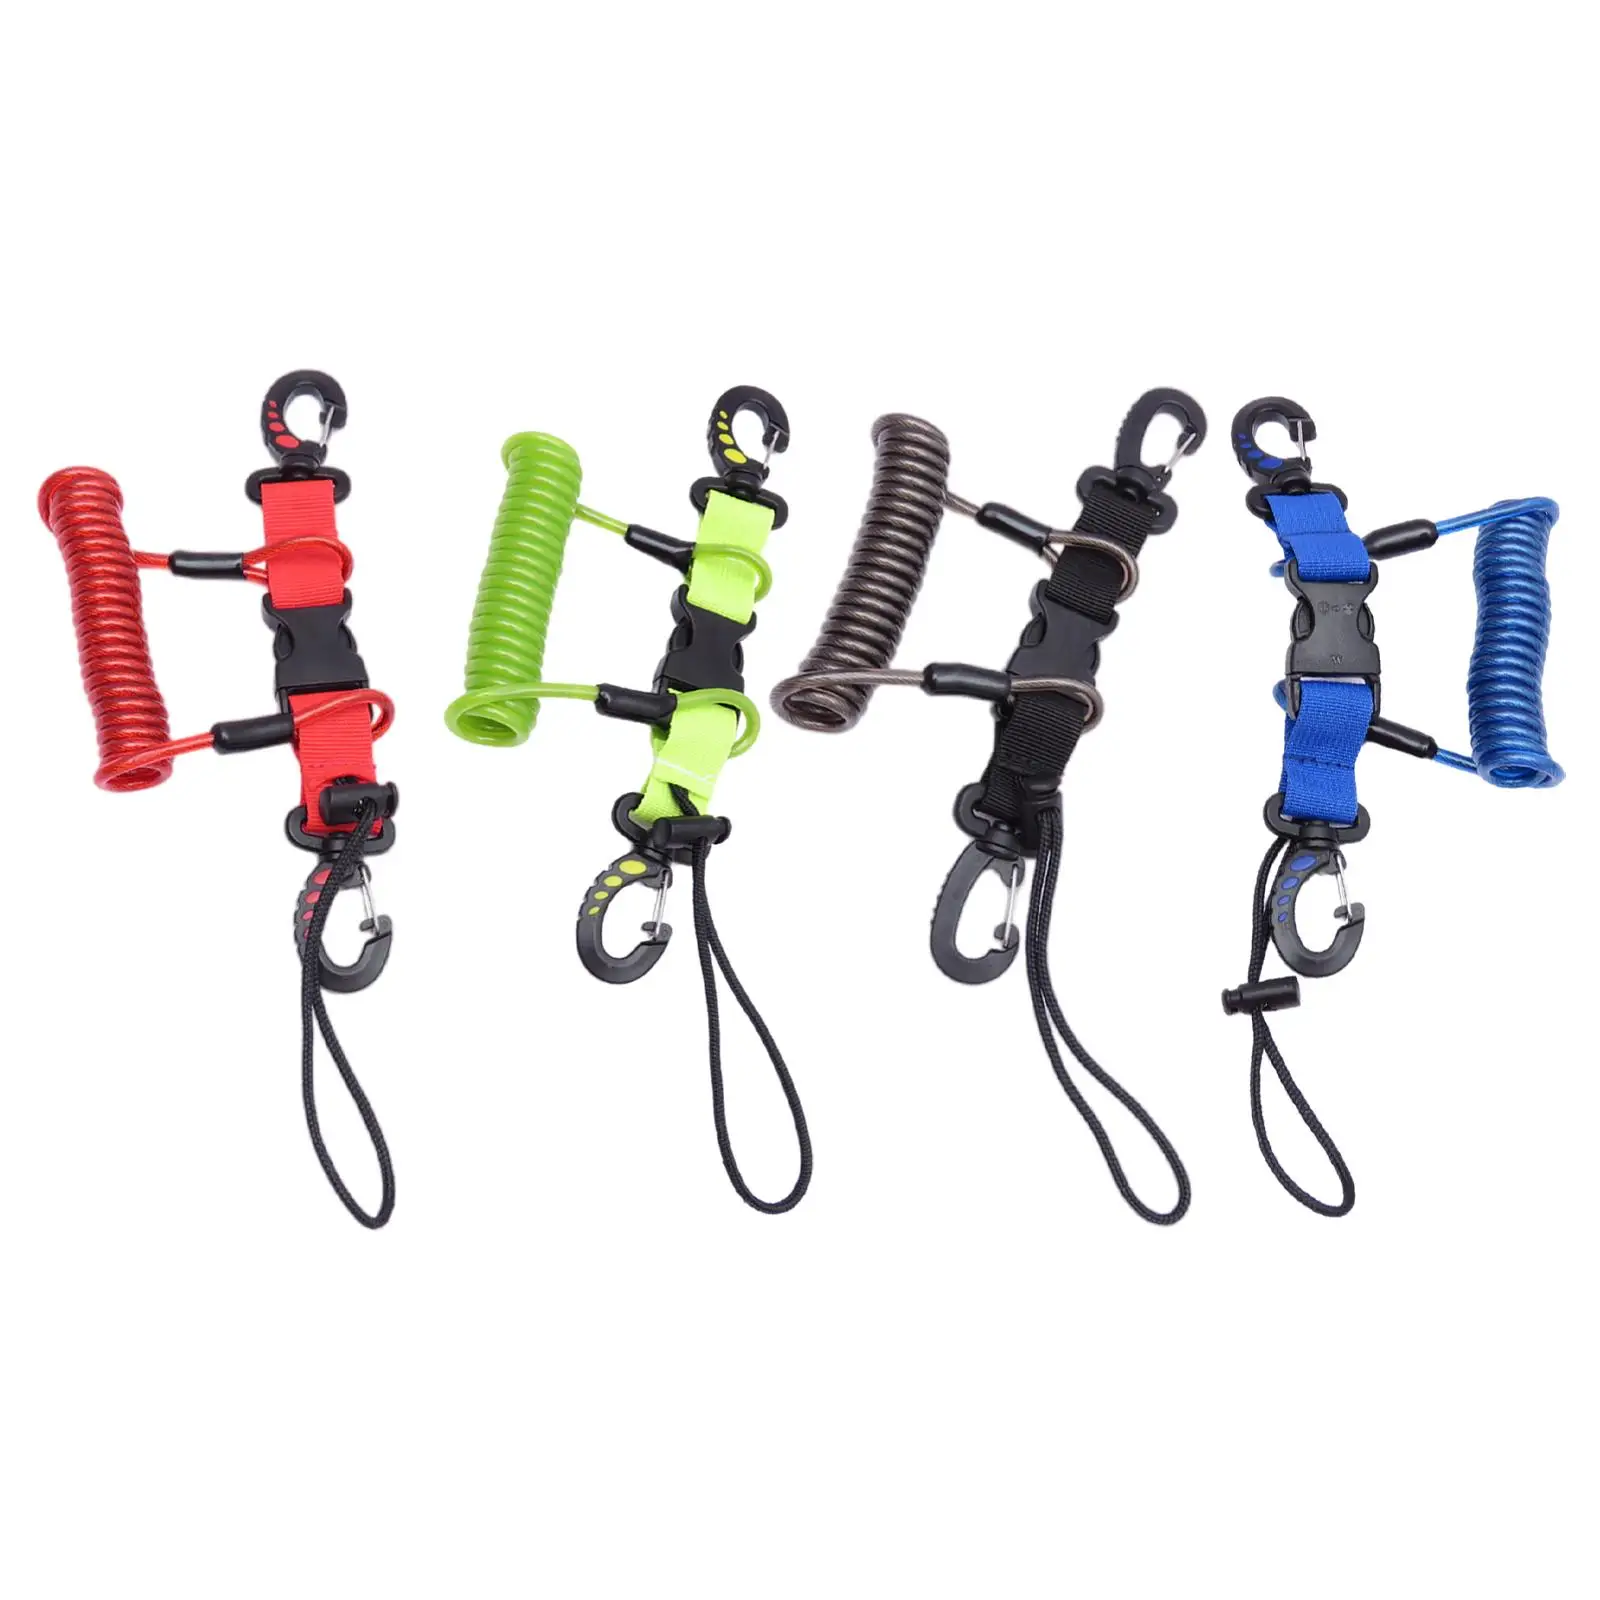 Scuba Diving Anti lost Spiral Spring Coil Lanyard Safety Emergency Tool with Quick Release Buckle